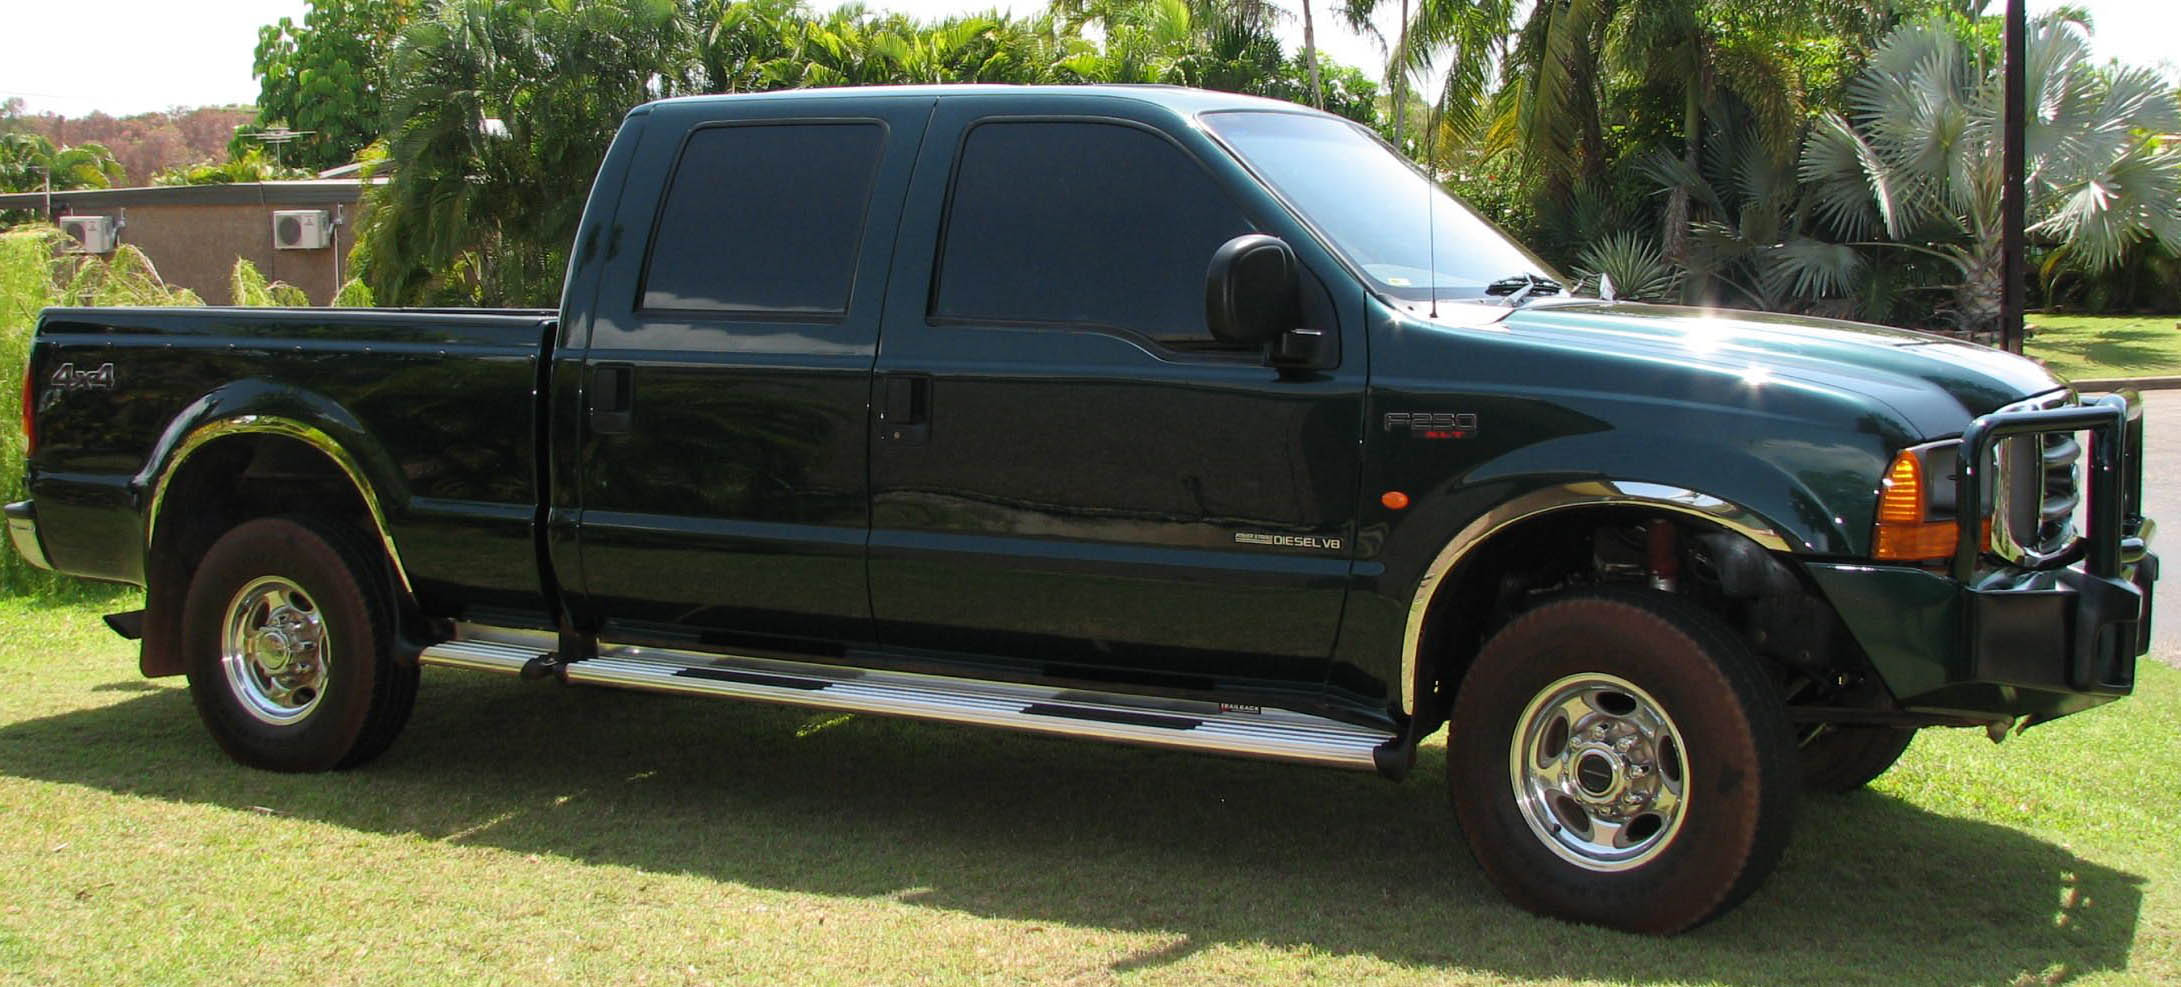 99-07 Ford F-250/Super Duty Front and Rear Wheel Arches Fender trim